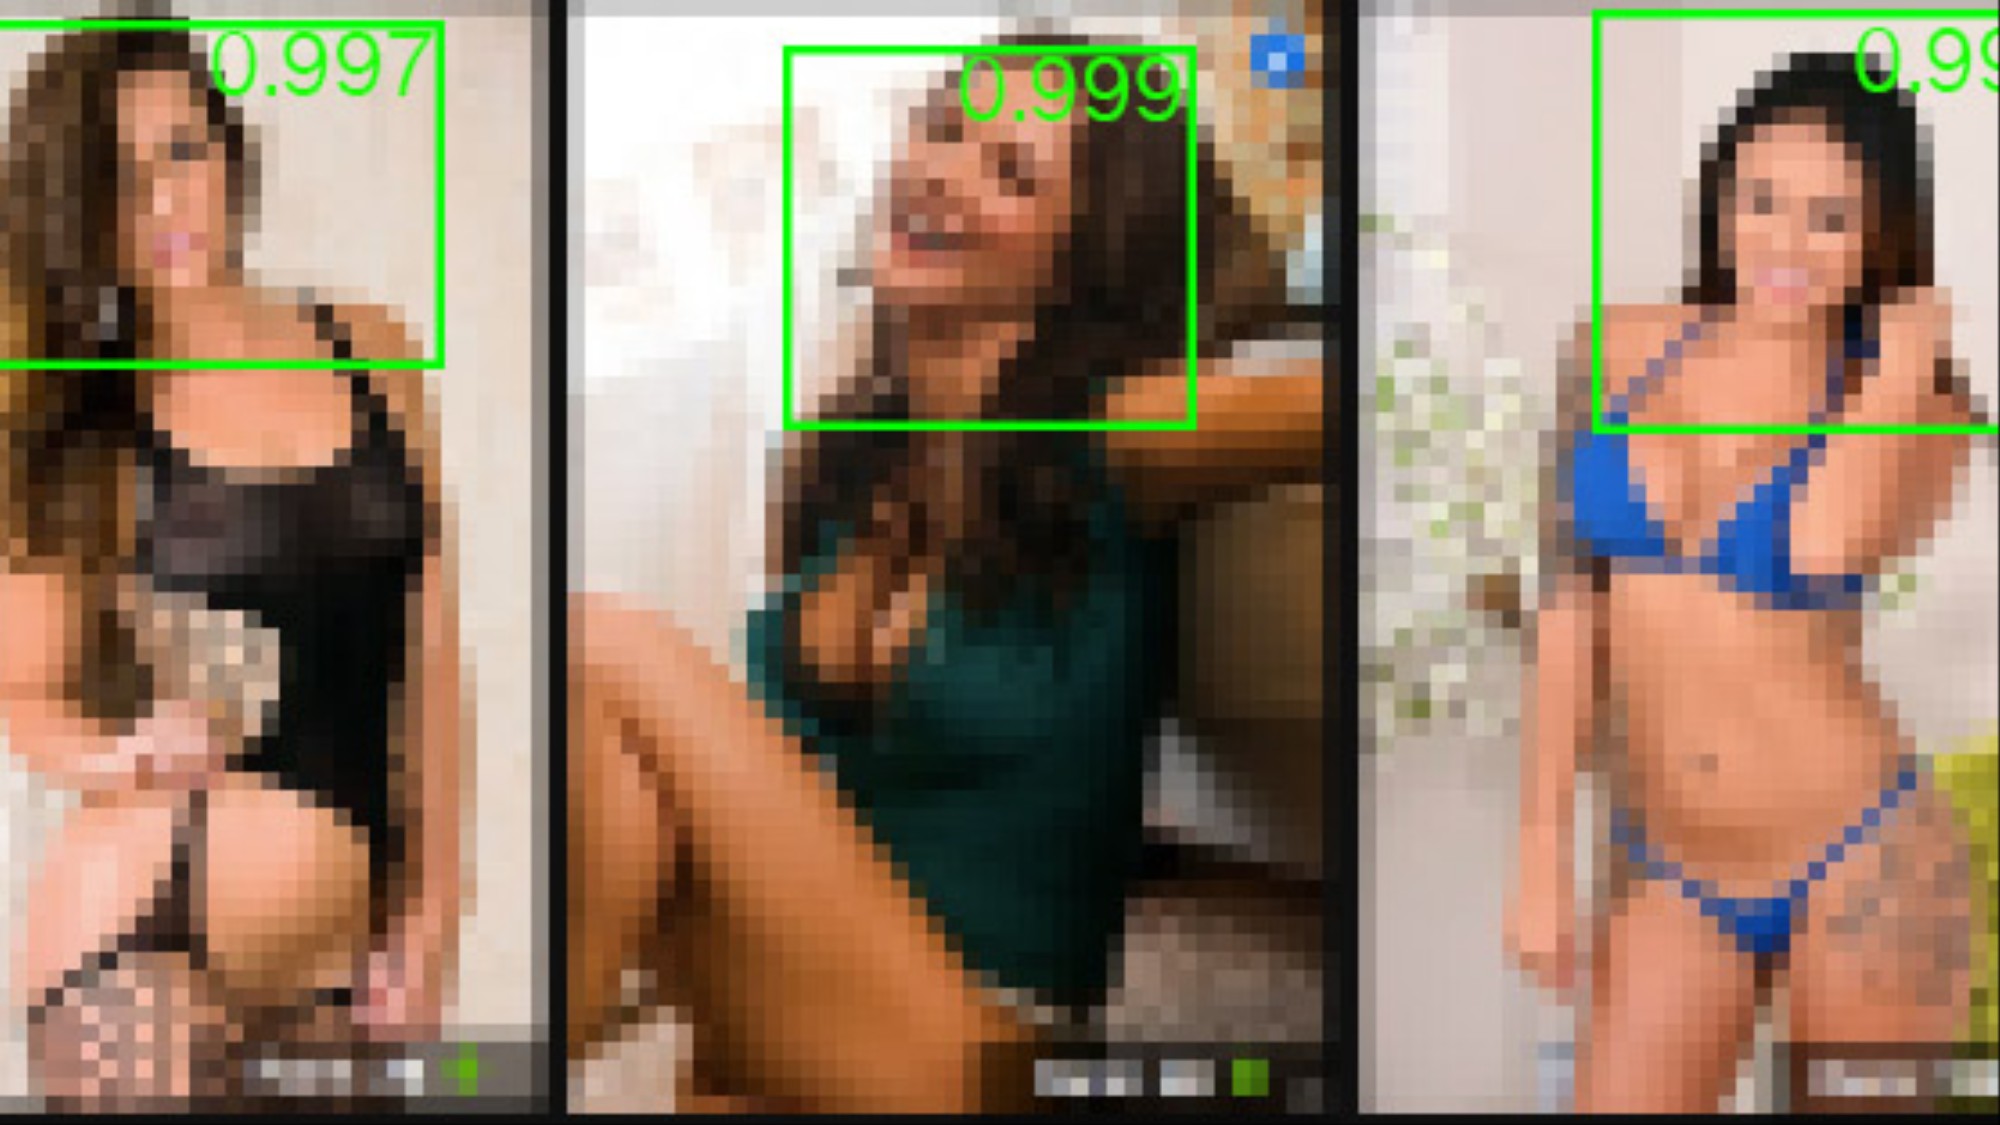 Internet Porn Stars Names - Facial Recognition for Porn Stars Is a Privacy Nightmare ...